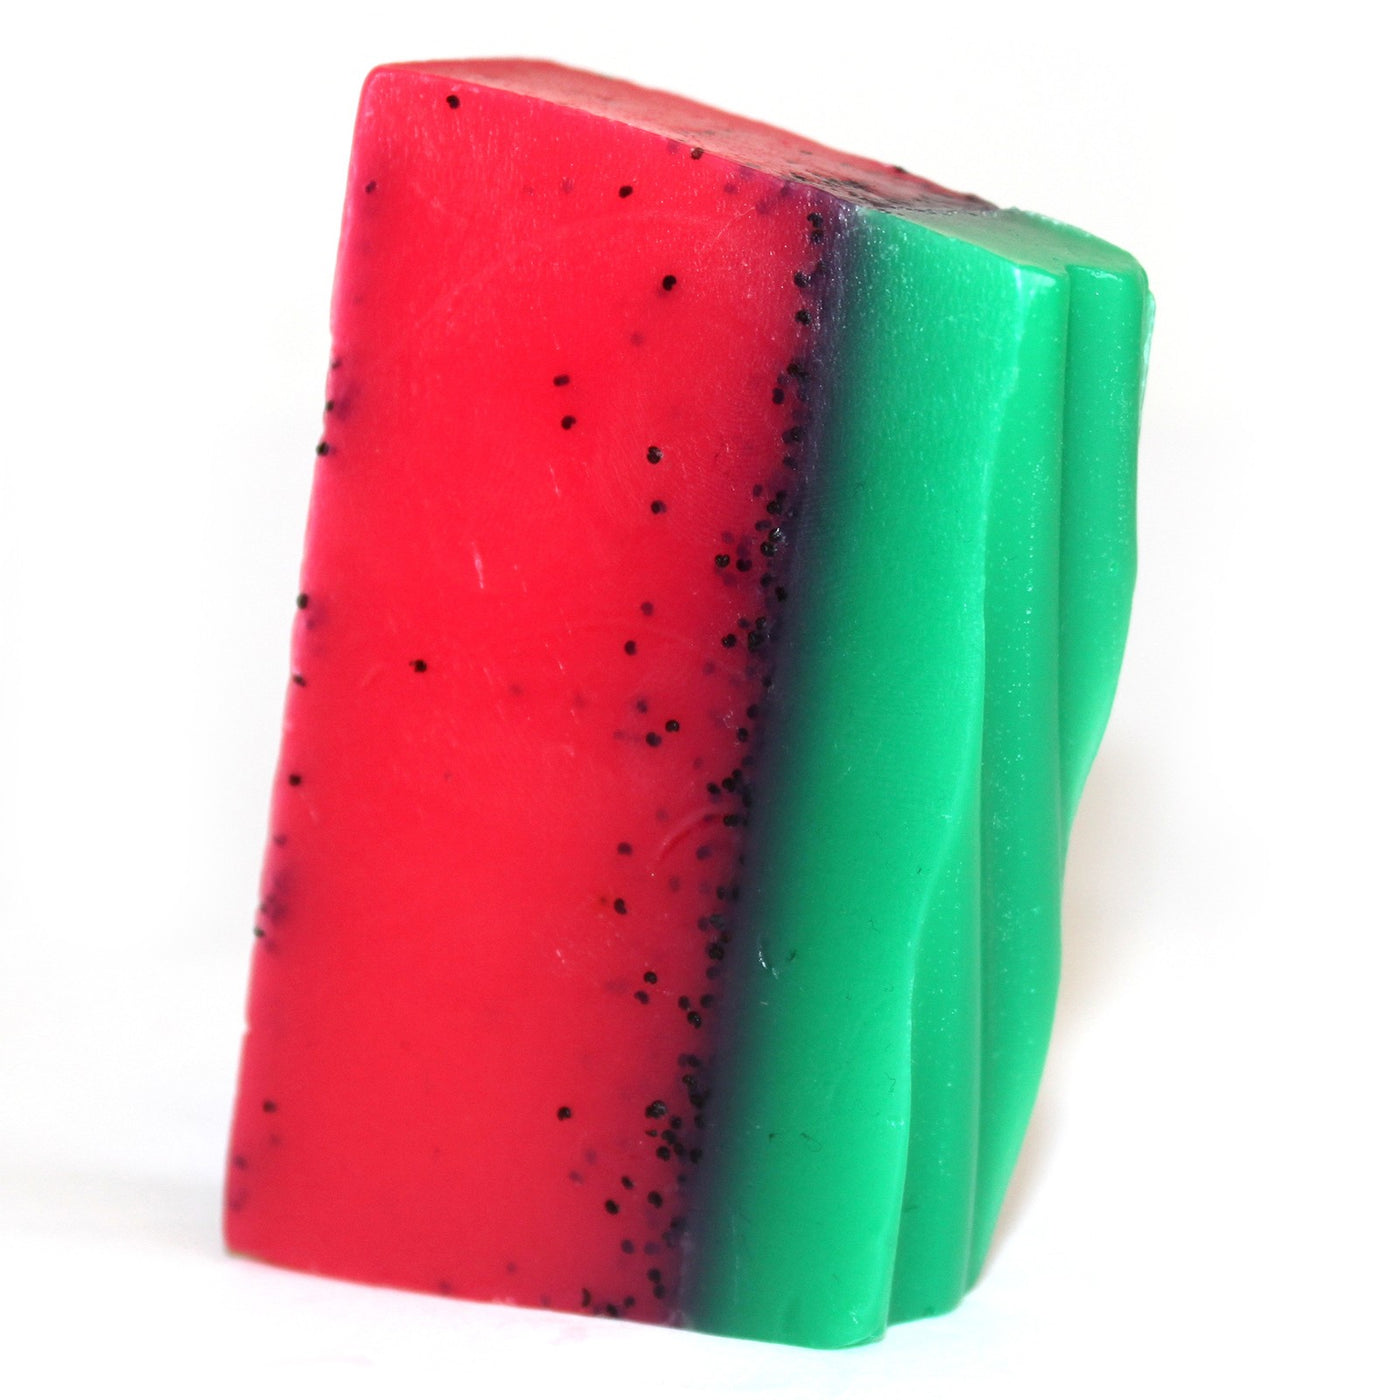 Tropical Paradise Soap Loaf And Soap Slices - Watermelon - 100gr - 1.1kg